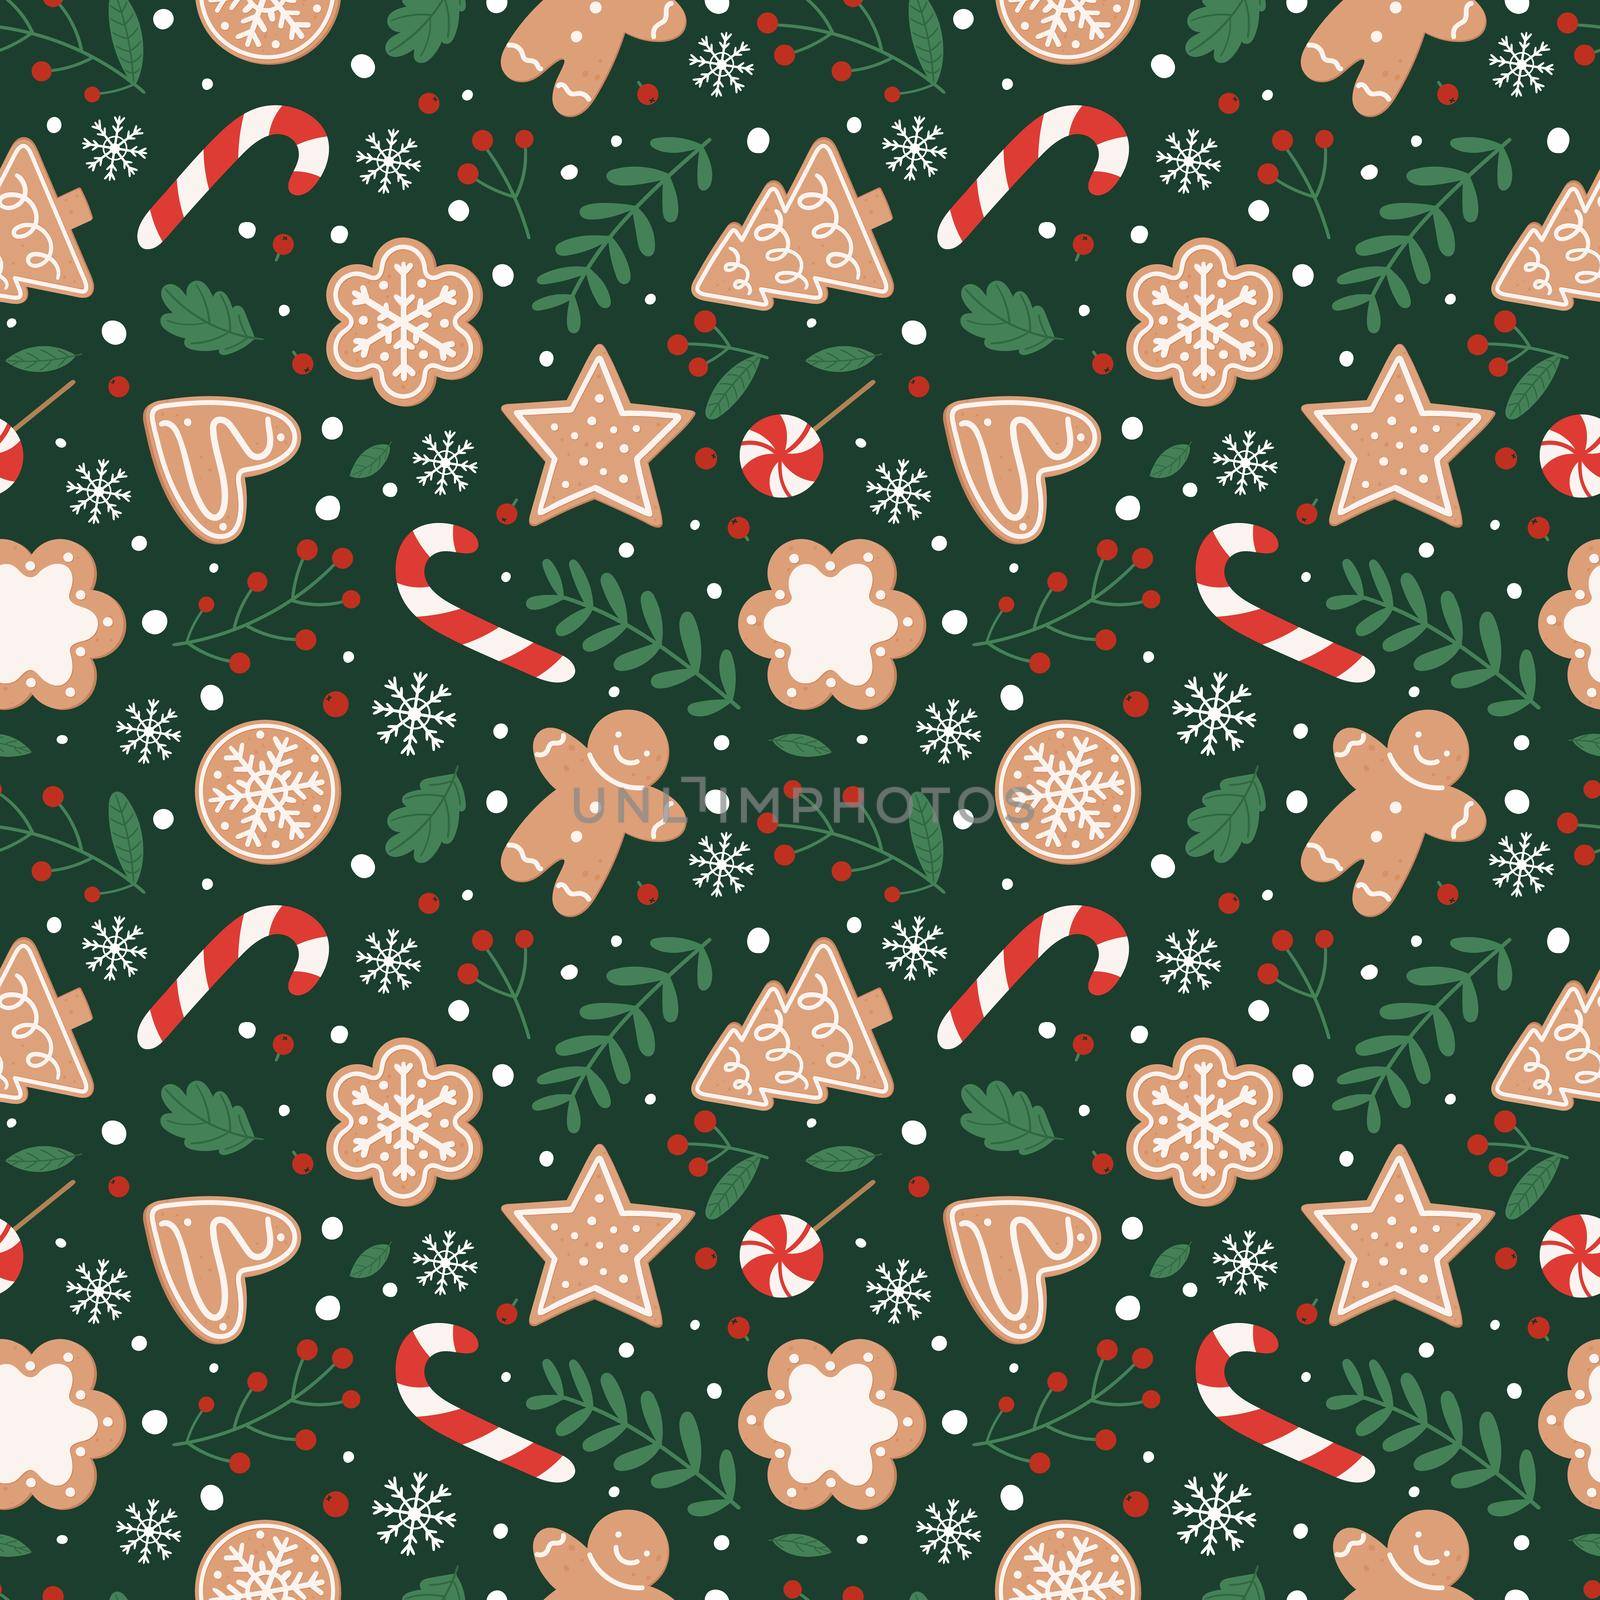 Gingerbread seamless pattern. Festive background with cookies, candies, leaves and berries. by Lena_Khmelniuk